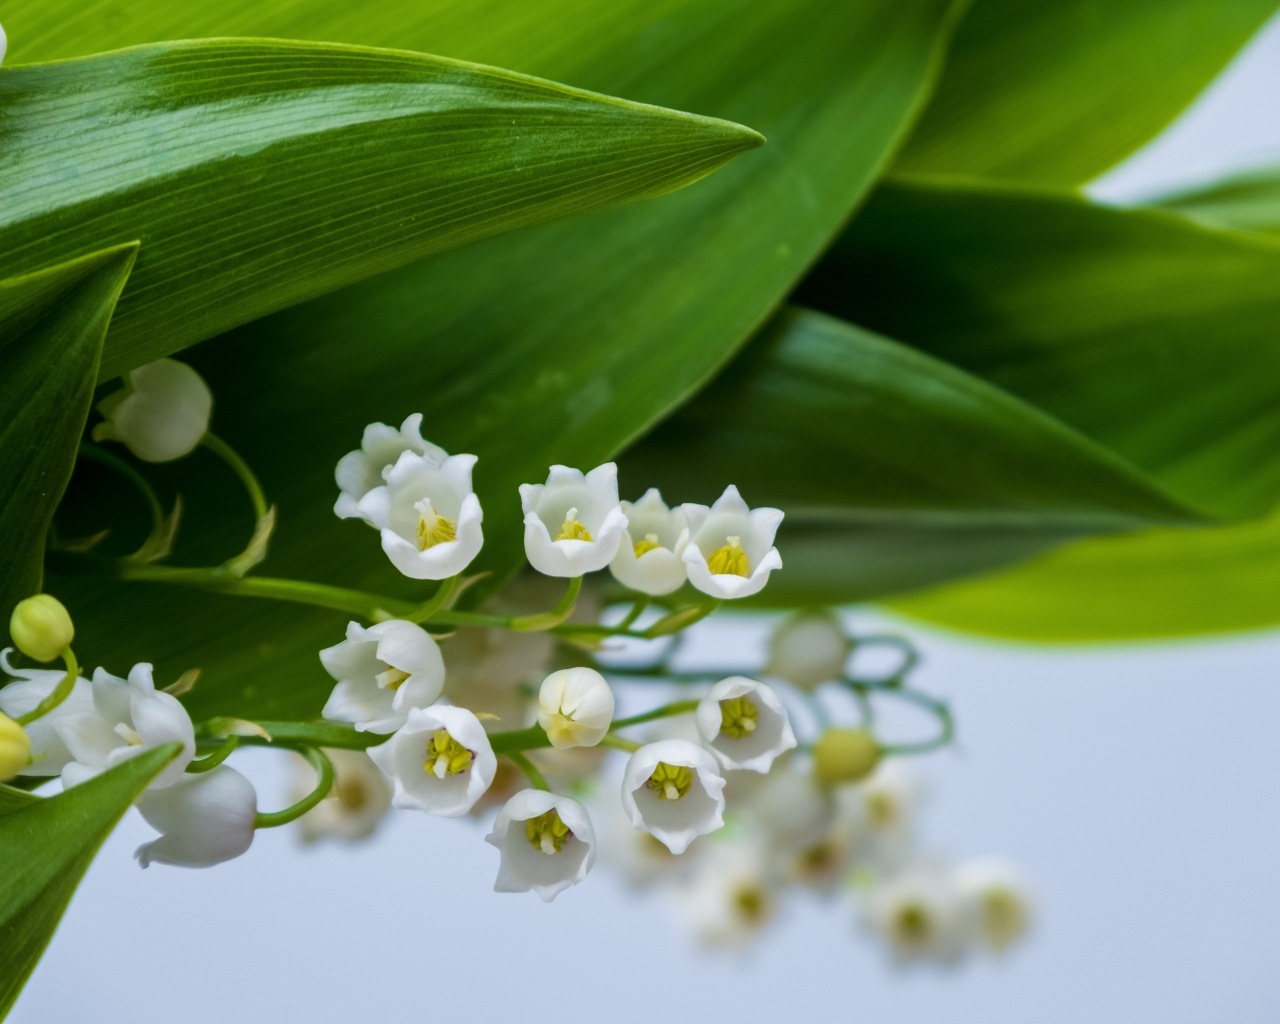 White lily of the valley flowers with green leaves